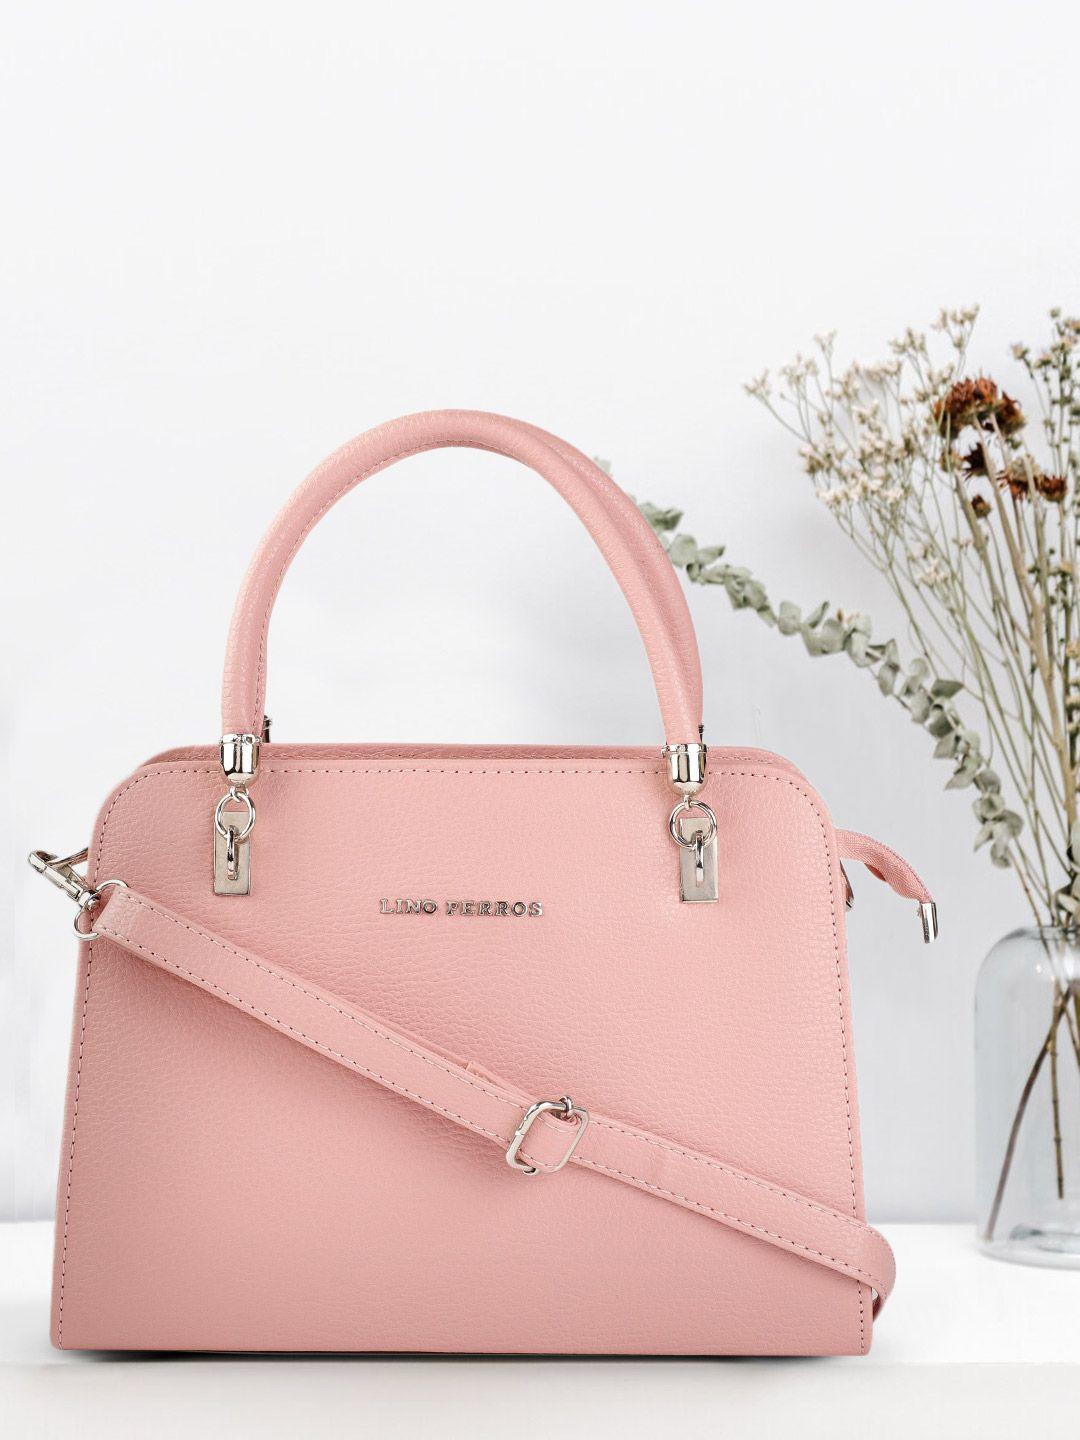 lino perros peach-coloured solid structured handheld bag